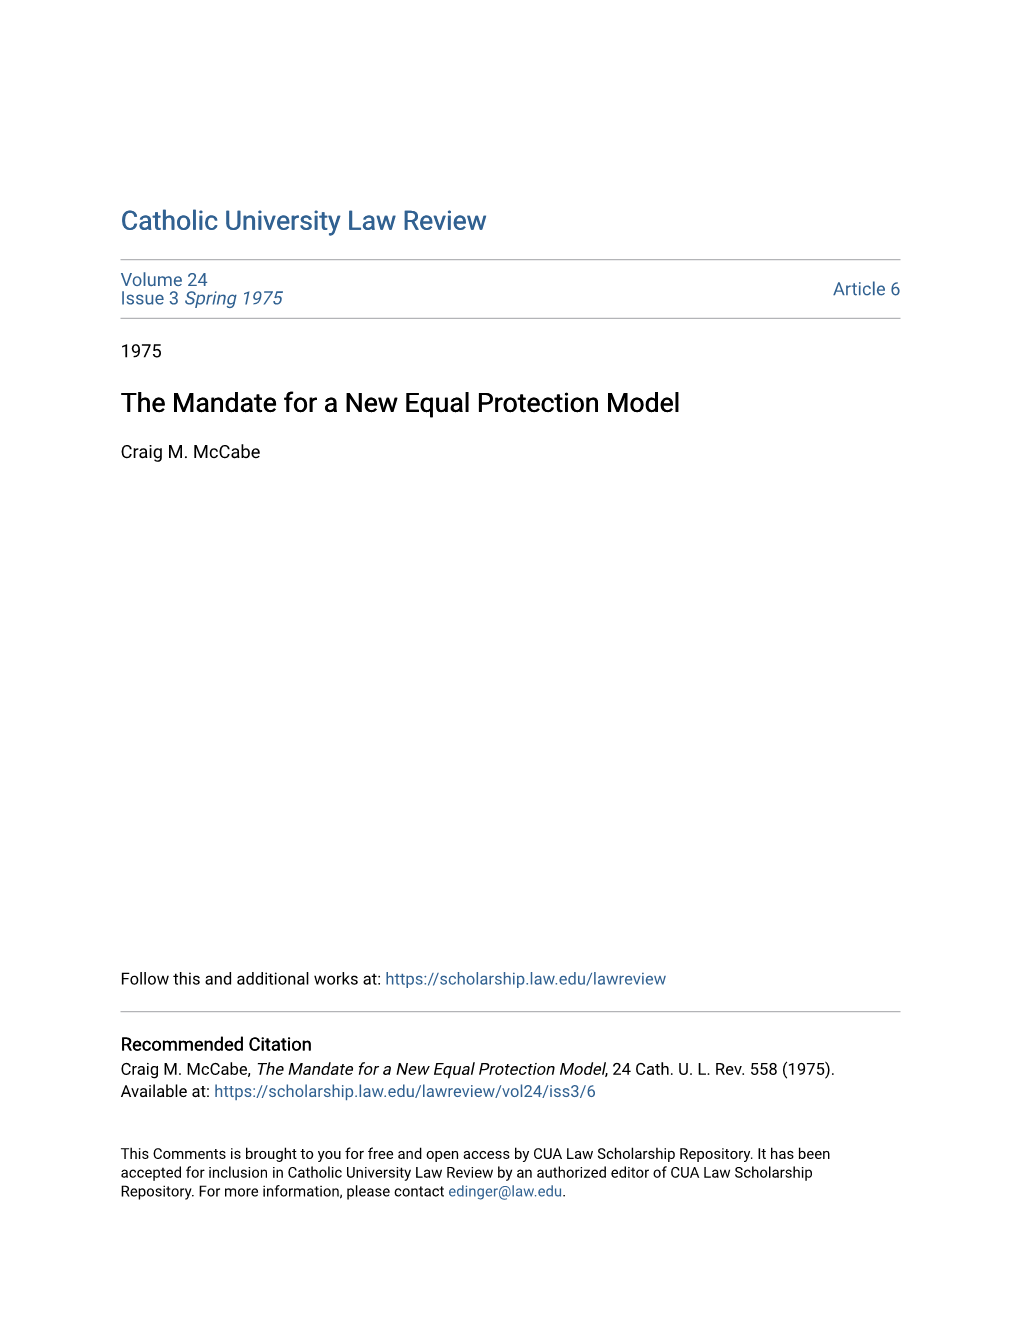 The Mandate for a New Equal Protection Model